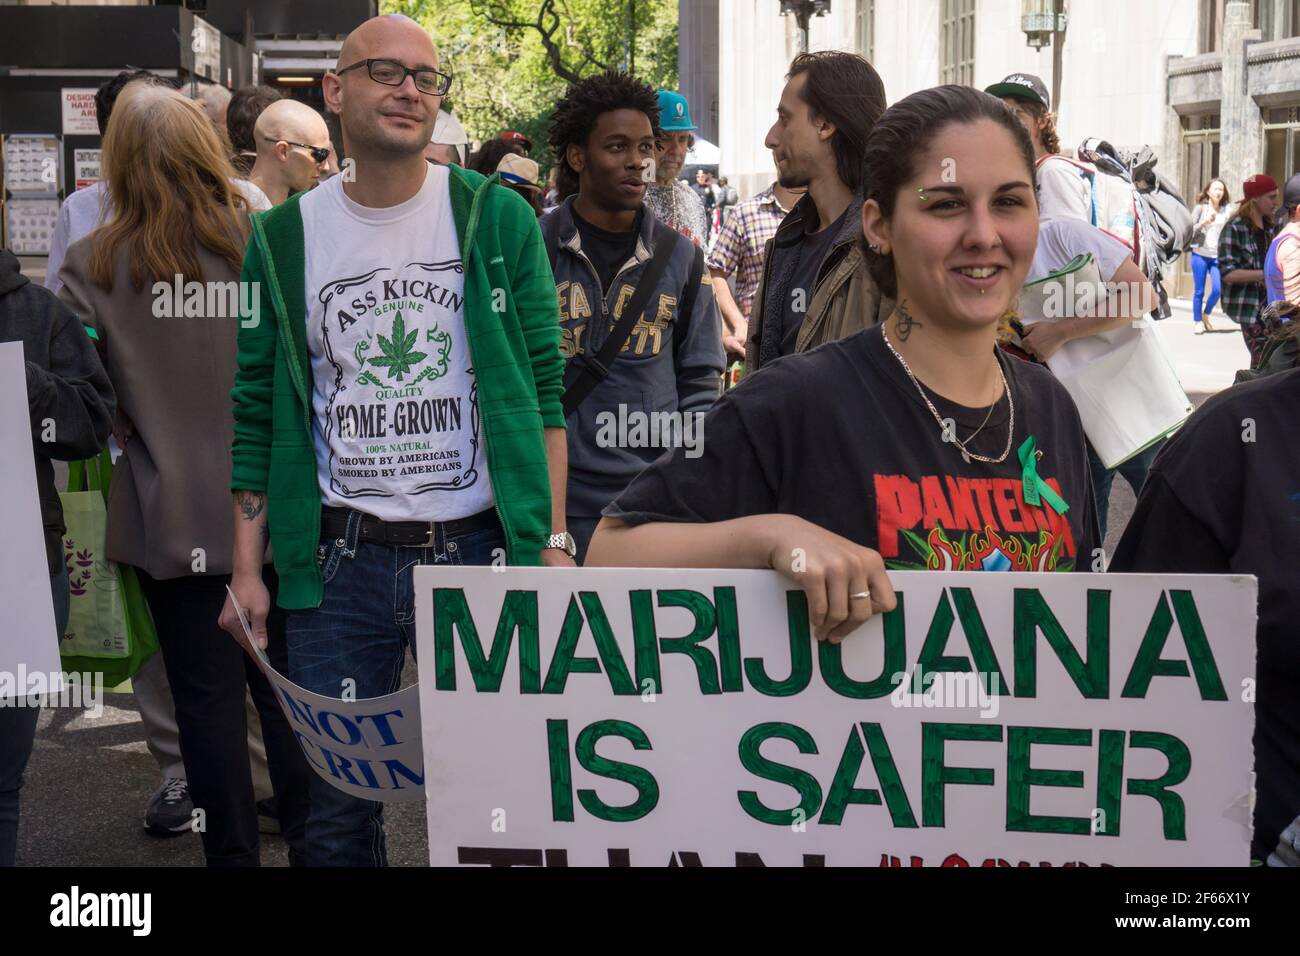 New York City, USA. 04th May, 2013. Advocates for the legalization of marijuana march in New York on Saturday, May 4, 2013 at the annual March For Marijuana. The march included a wide range of demographics from young people to old-time hippies. The participants in the parade called for the use of marijuana for medical treatment and for recreational uses. (Photo by Richard B. Levine) Credit: Sipa USA/Alamy Live News Stock Photo